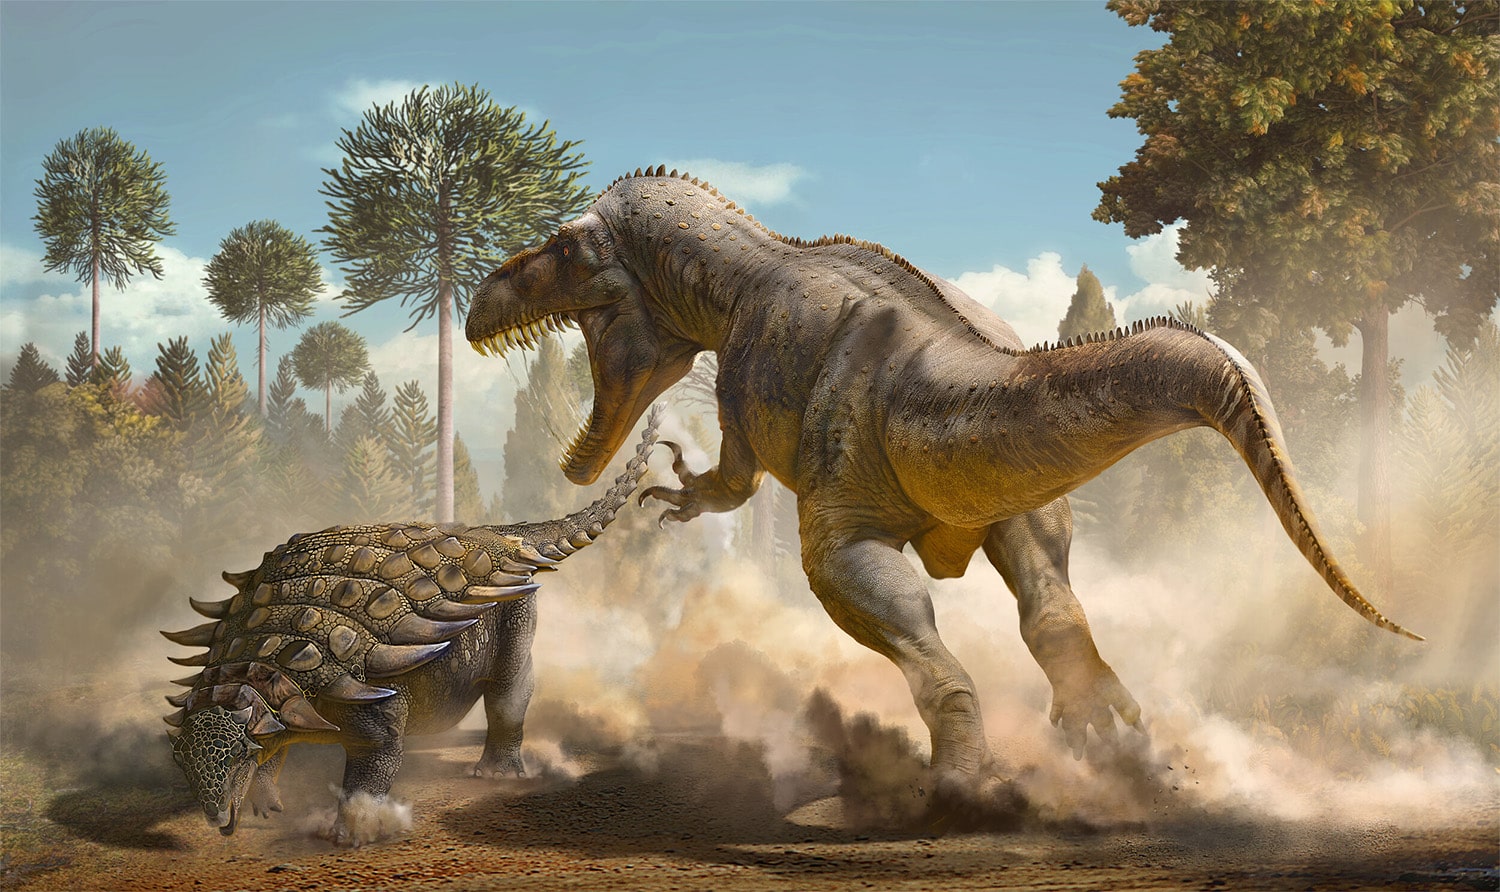 21 interesting facts about Jurassic Period